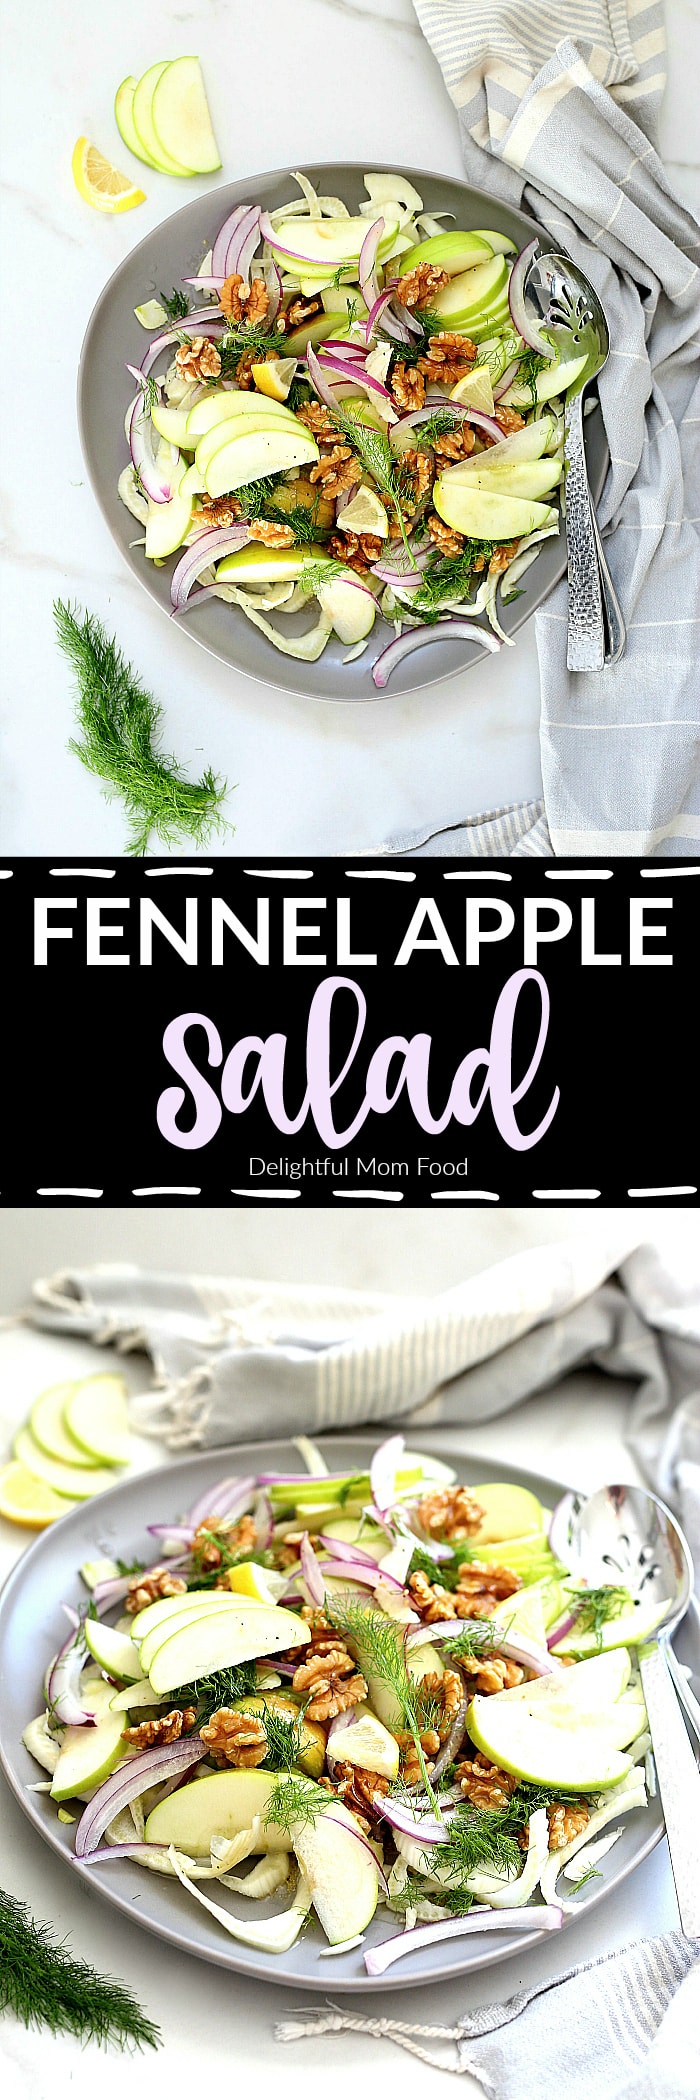 A light and simple fennel apple salad that everyone will love! This refreshing winter salad is drizzled with a light vinaigrette dressing that ramps up the flavors of fennel and apple – 10 minutes and a total crowd pleaser! #apple #fennel #salad #winter #glutenfree #healthy #easy #quick #winter #vegetarian #vegan #dairyfree #dressing | Recipe at delightfulmomfood.com